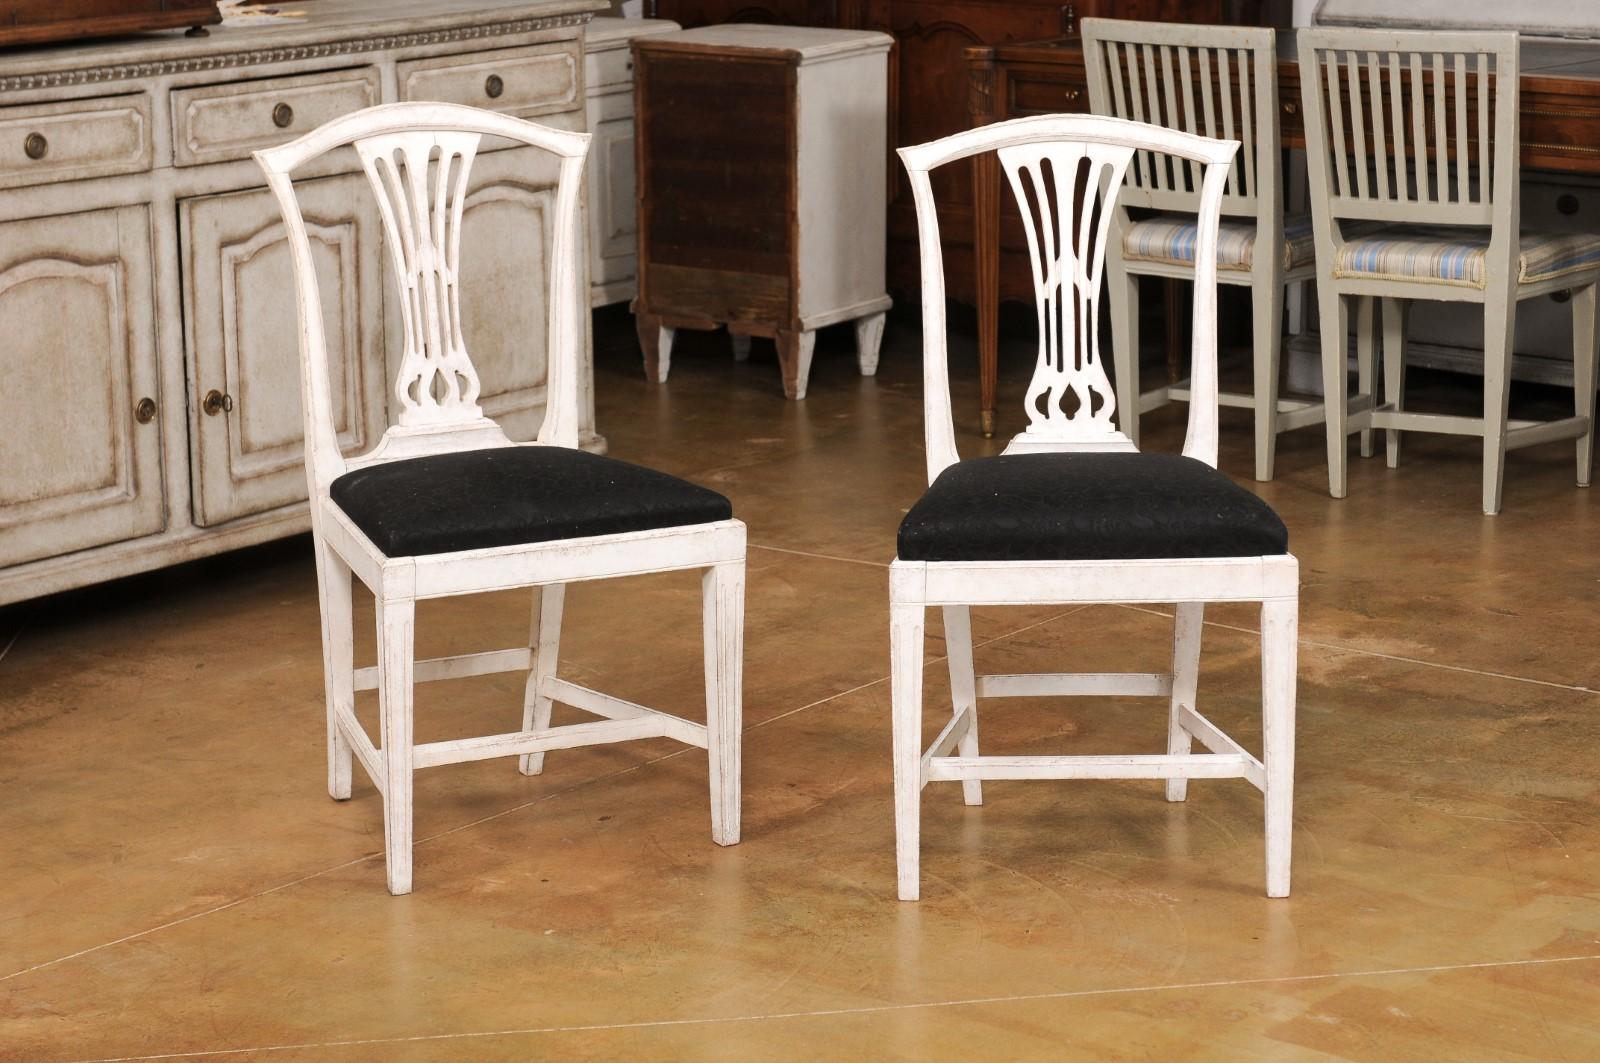 Set of Six Swedish 1890s Painted Wood Dining Room Side Chairs with Black Fabric In Good Condition For Sale In Atlanta, GA